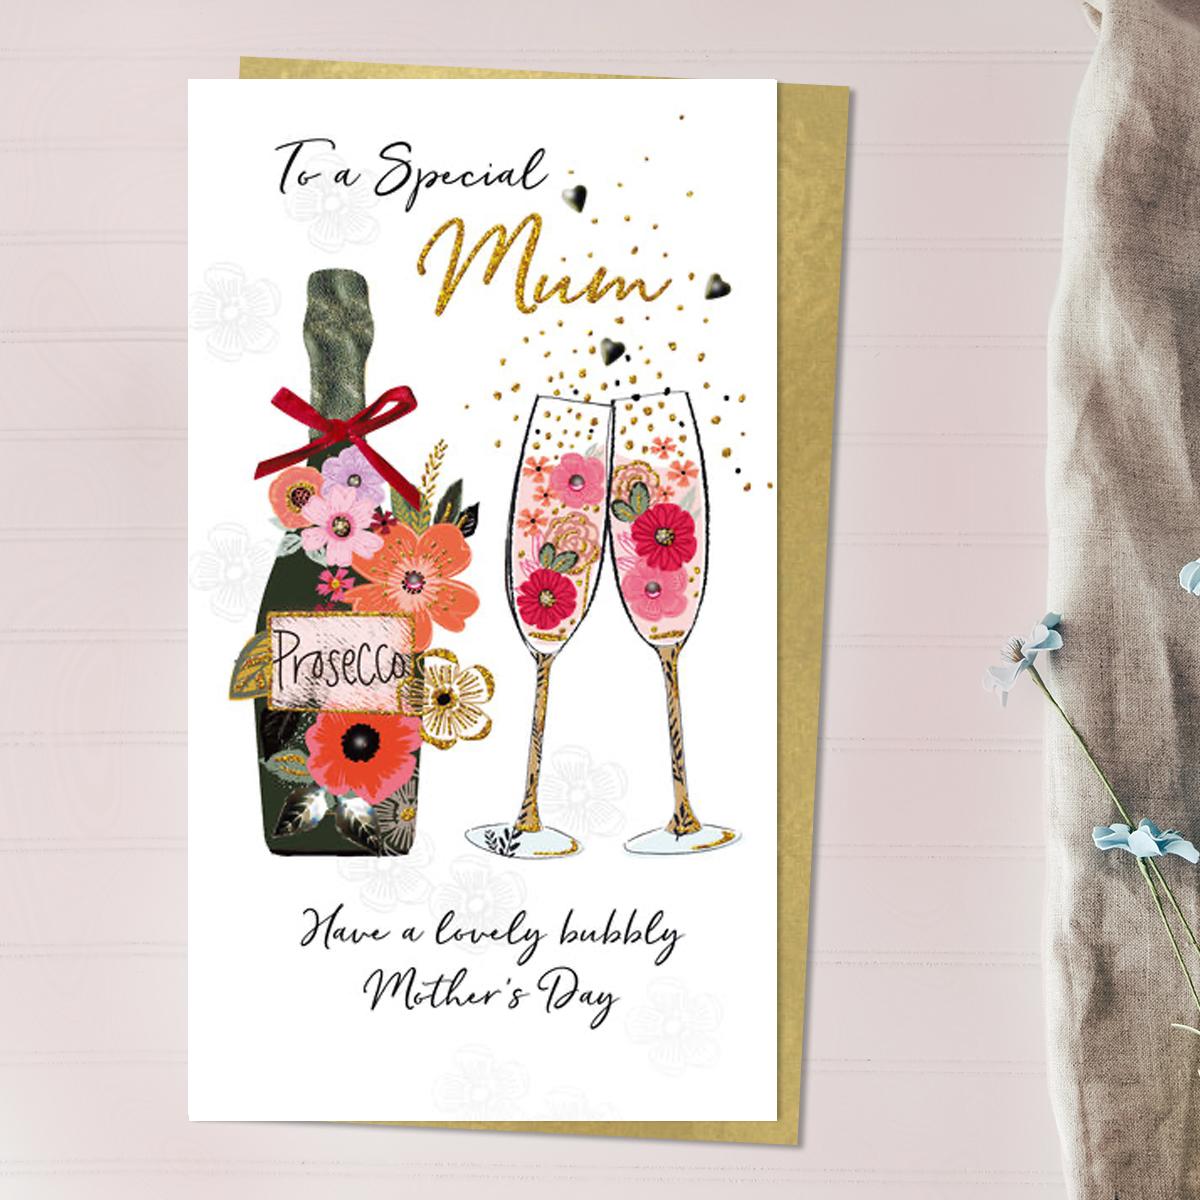 Prosecco Themed Mother's Day Design Alongside Its Gold Envelope